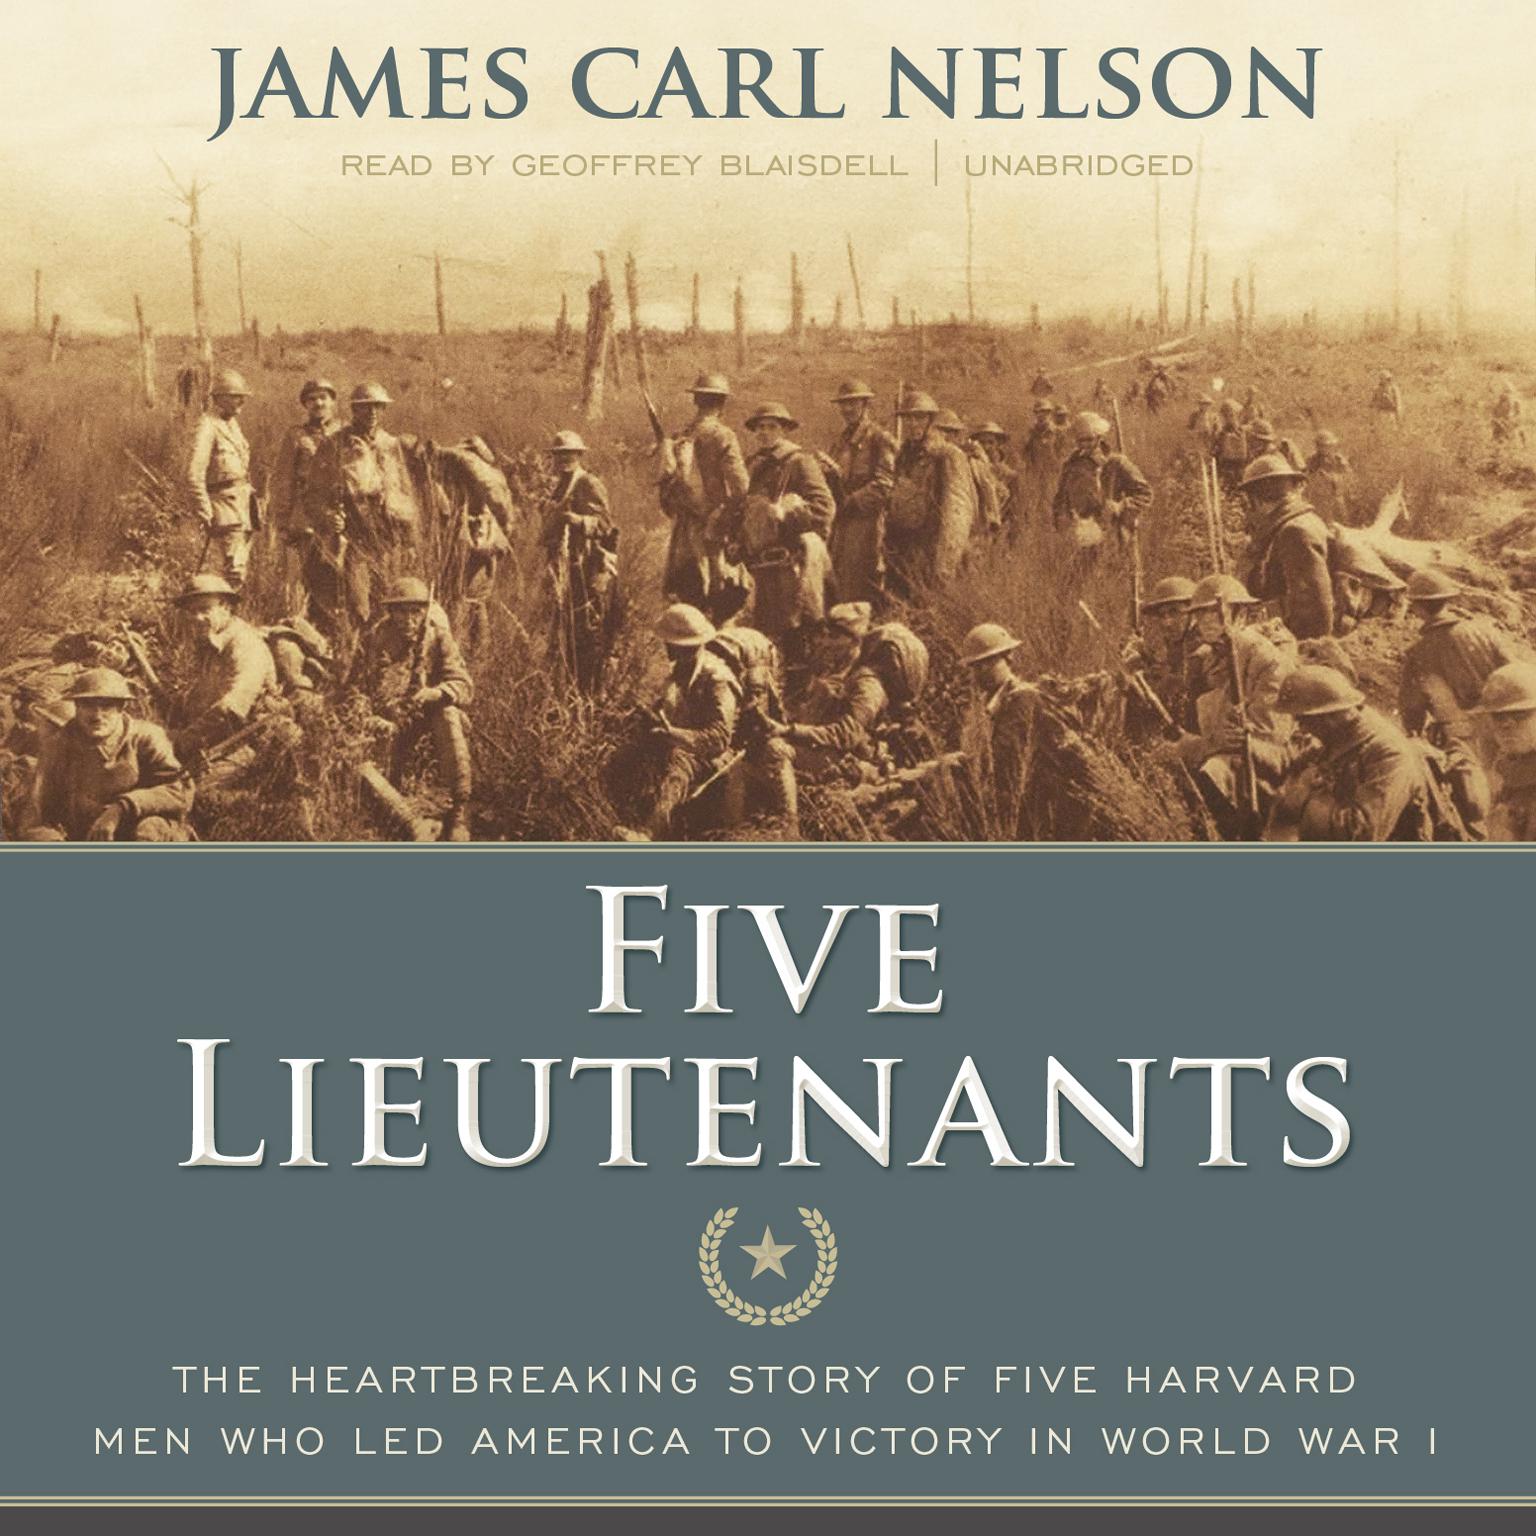 Five Lieutenants: The Heartbreaking Story of Five Harvard Men Who Led America to Victory in World War I Audiobook, by James Carl Nelson